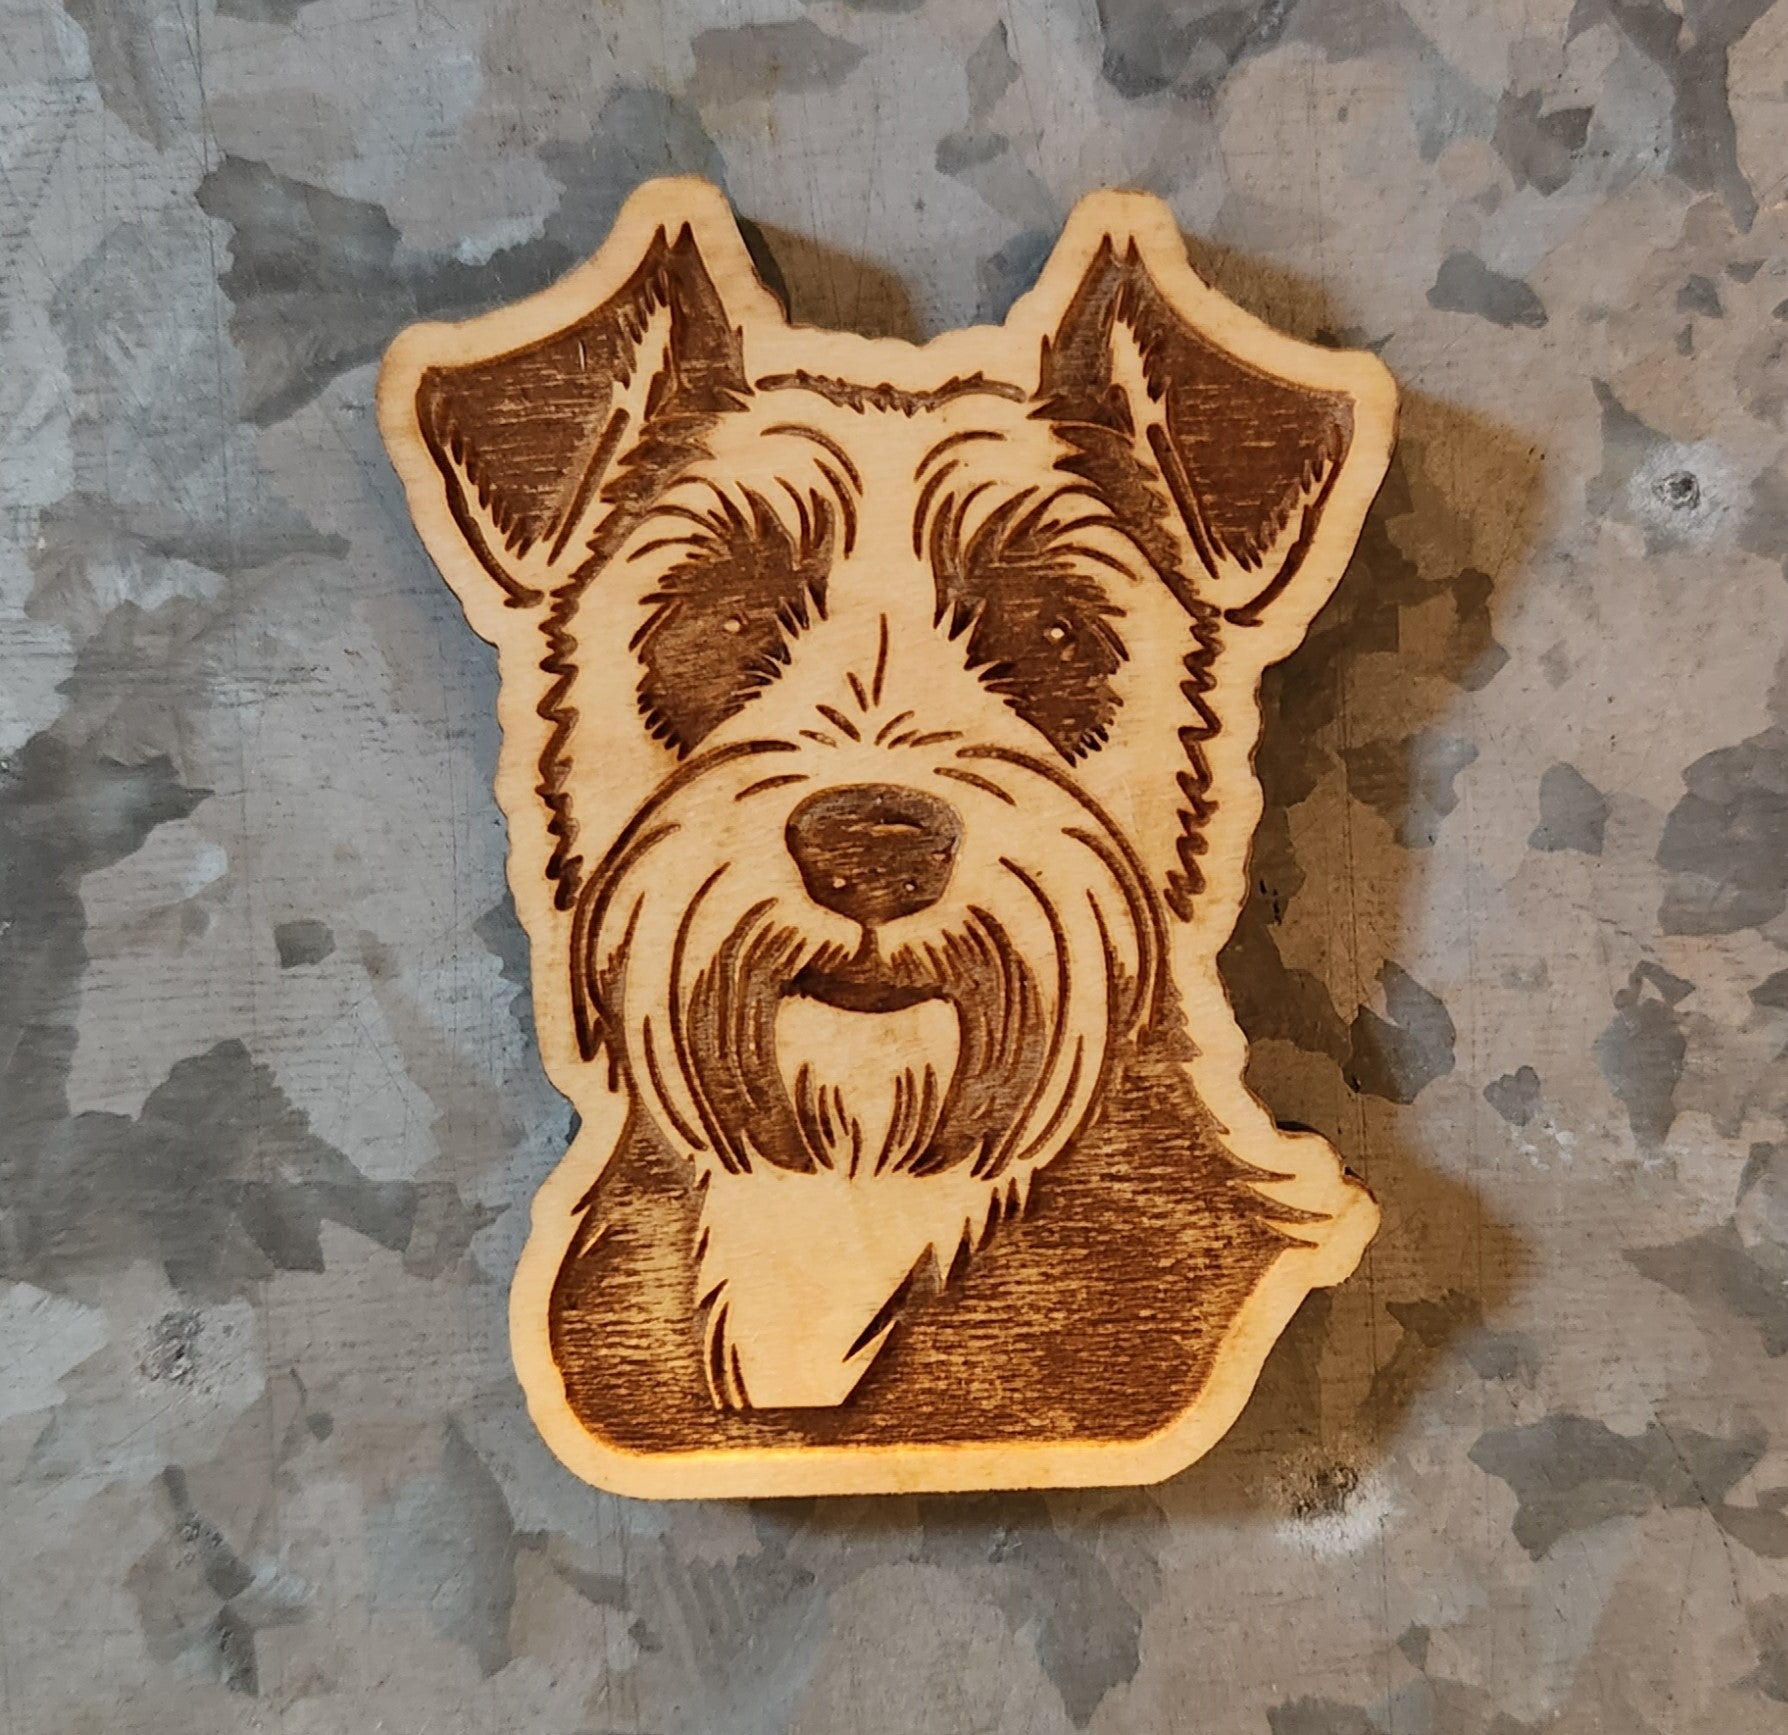 Airedale Terrier Magnet